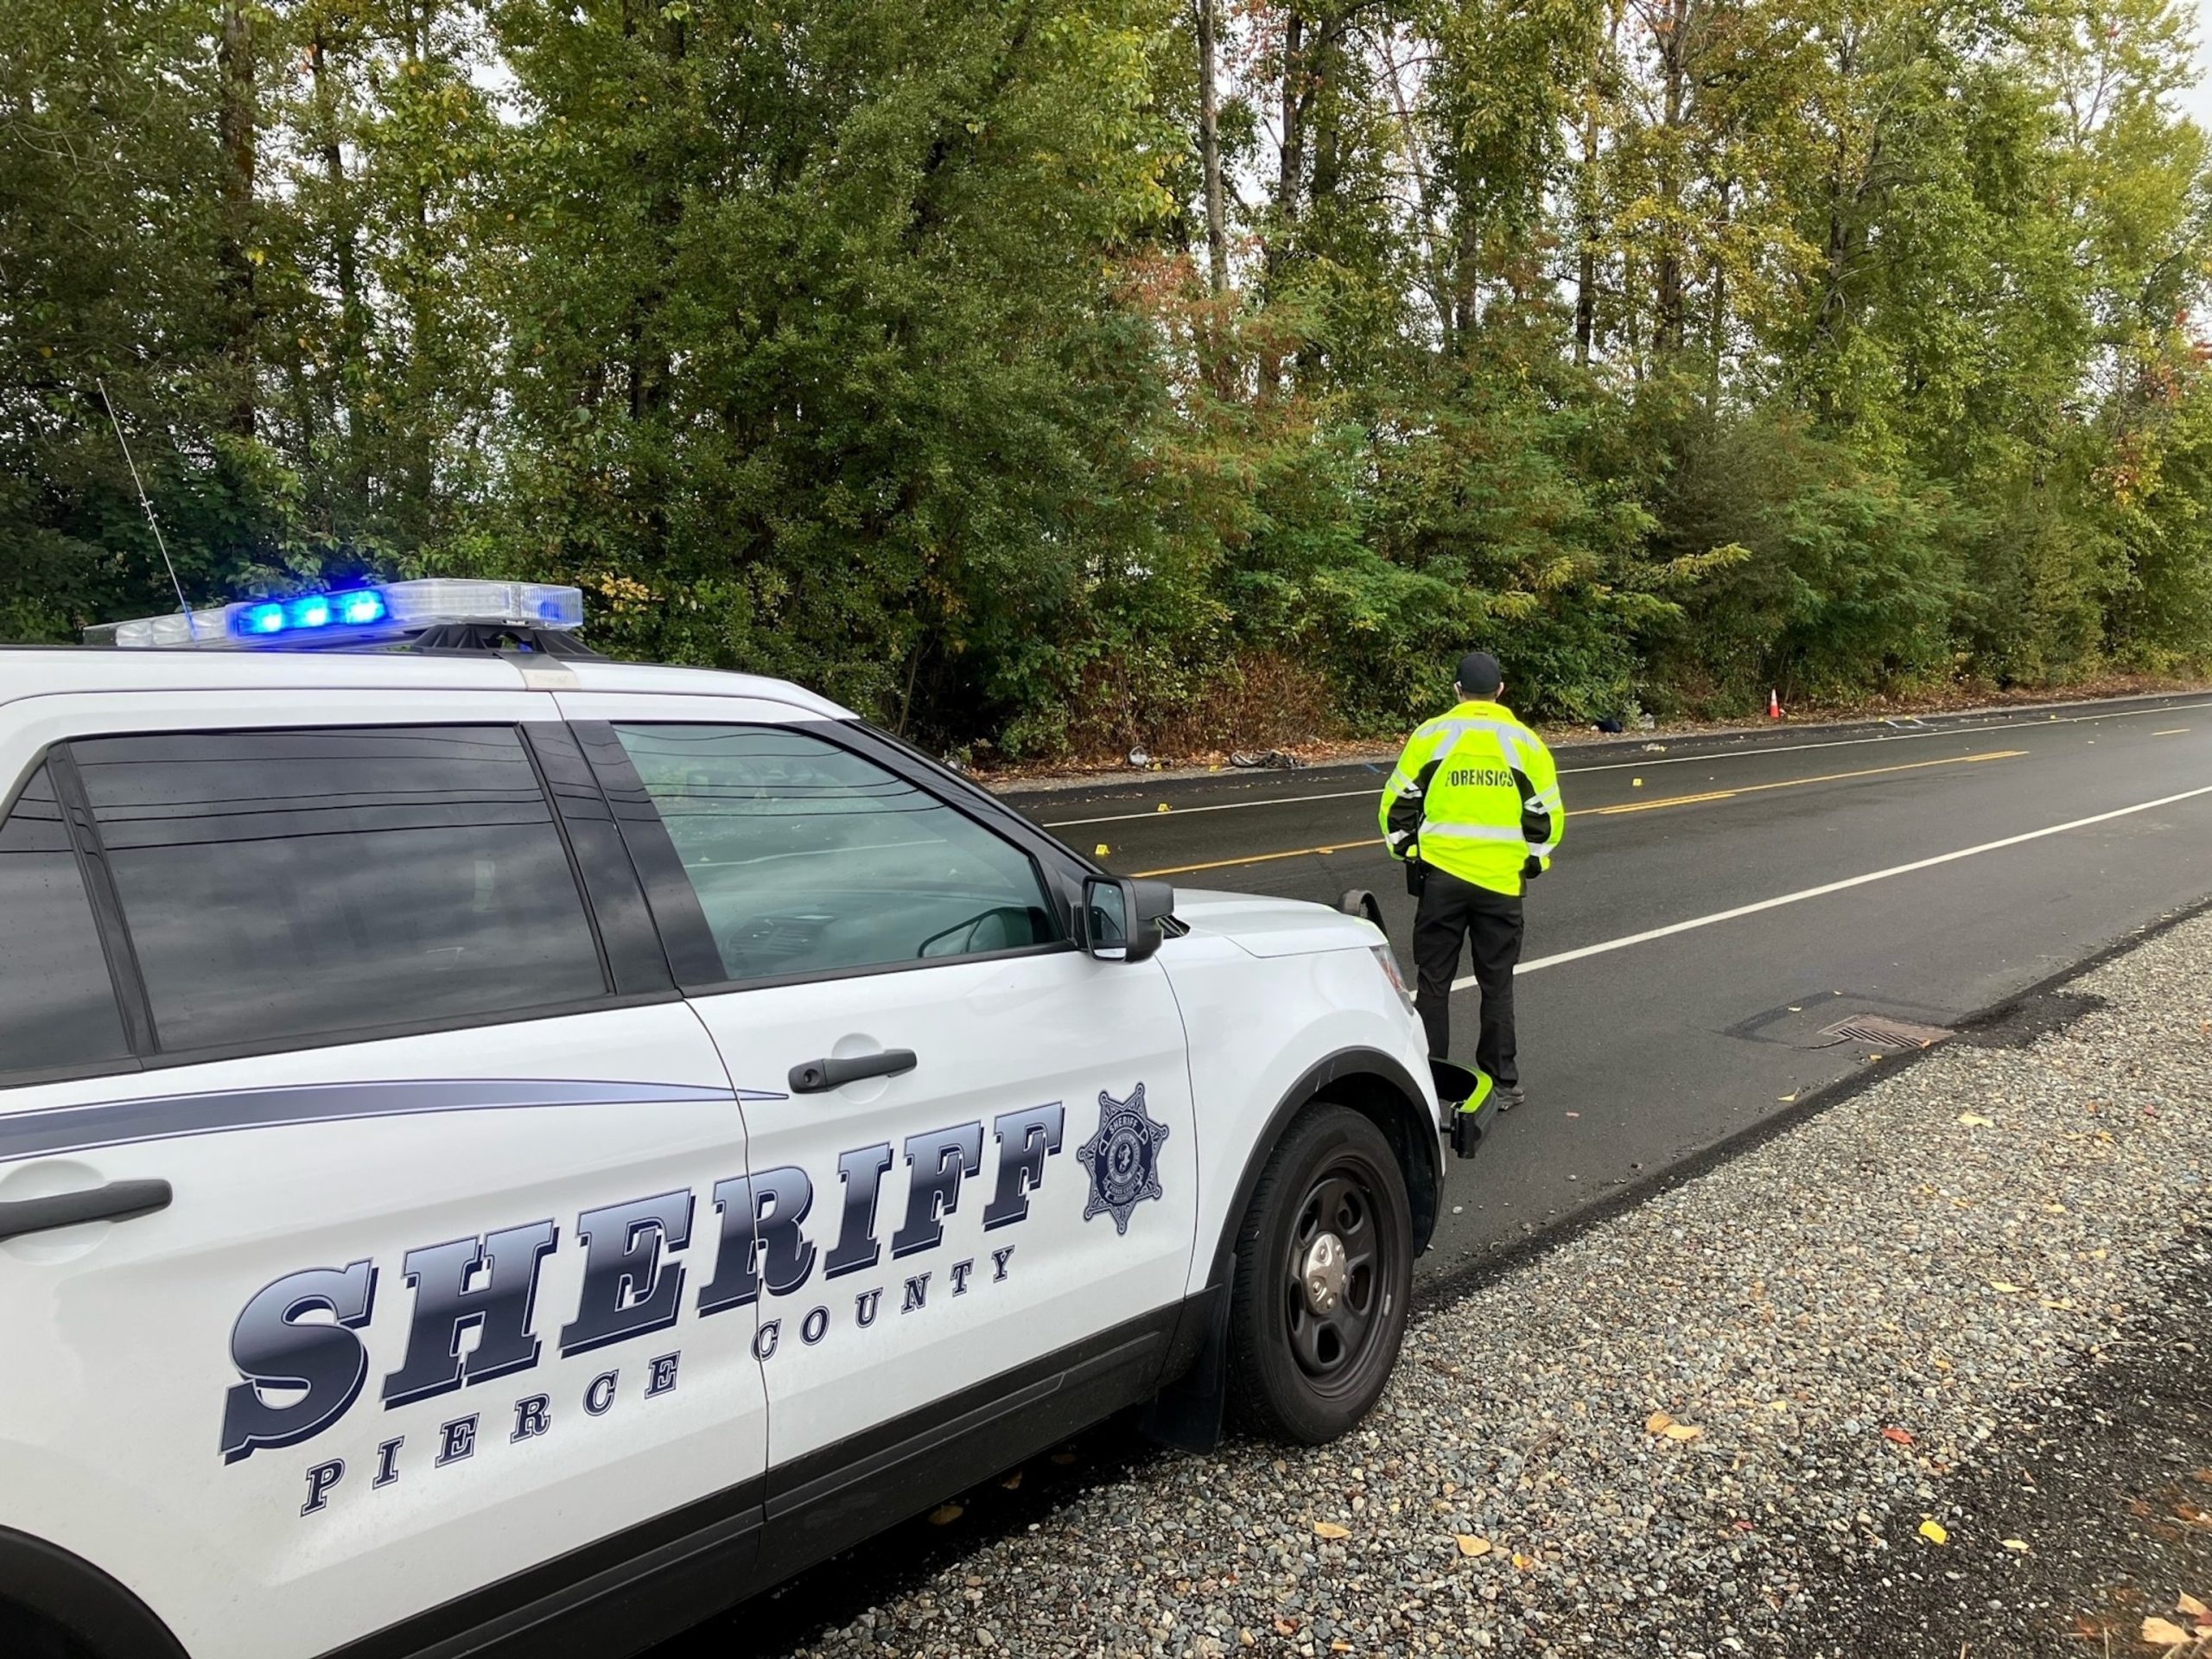 Authorities are searching for a suspect involved in a potentially intentional hit-and-run incident in Tacoma resulting in a fatality.